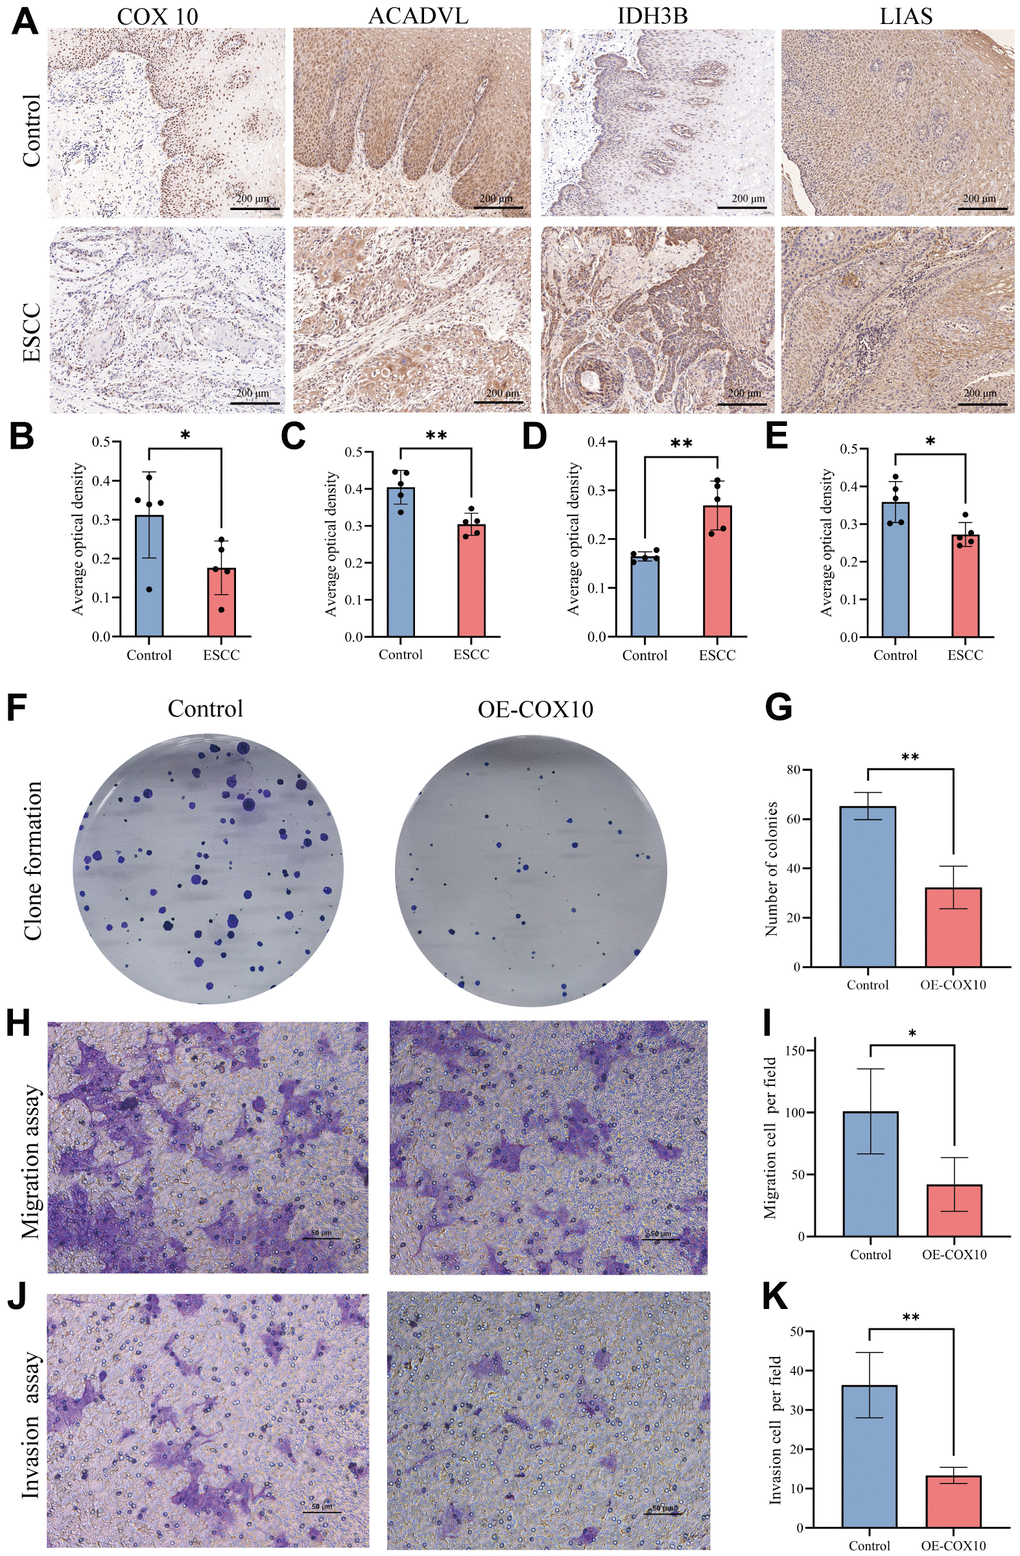 The expression of MMRGs and the role of COX10 protein in ESCC. (A) Representative image of the IHC staining of COX10, ACADVL, IDH3B and LIAS. (B–E) Quantitative statistics of the expression of COX10 (B), ACADVL (C), IDH3B (D) and LIAS (E). (F) Colony formation of ESCC cells transfected with COX10 or vector. (G) Quantitative statistics of the Colonies. (H) The migration ability of ESCC cells transfected with COX10 or vector. (I) Quantitative statistics of the migration cells per field. (J) The invasion ability in ESCC cells transfected with COX10 or vector. (K) Quantitative statistics of the invasion cells per field. Each experiment was repeated three times independently, and * stands for PP